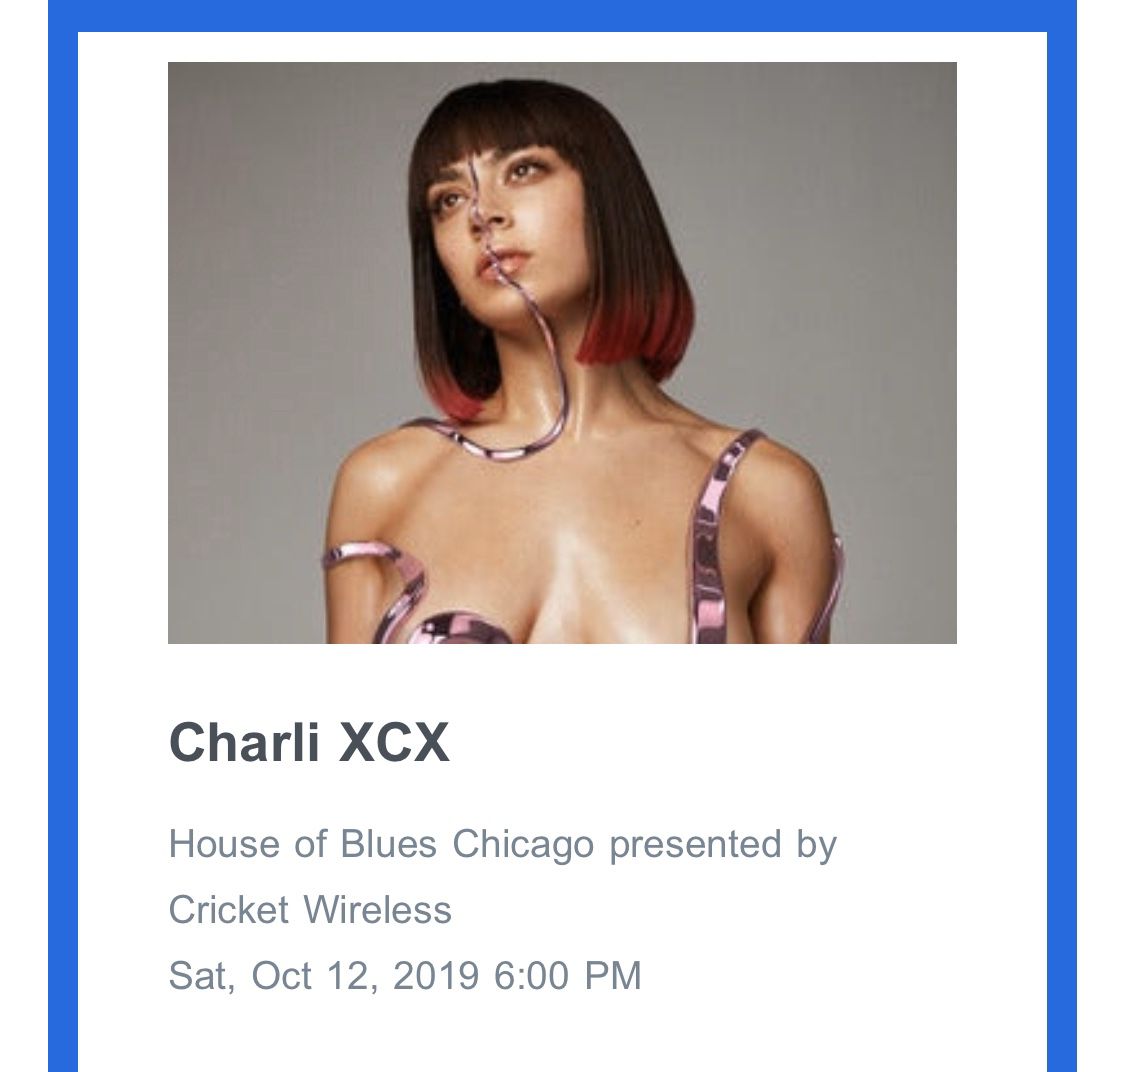 charlixcx 2 tickets @ house of blues !!!!!!!!!! TONIGHT!!!!